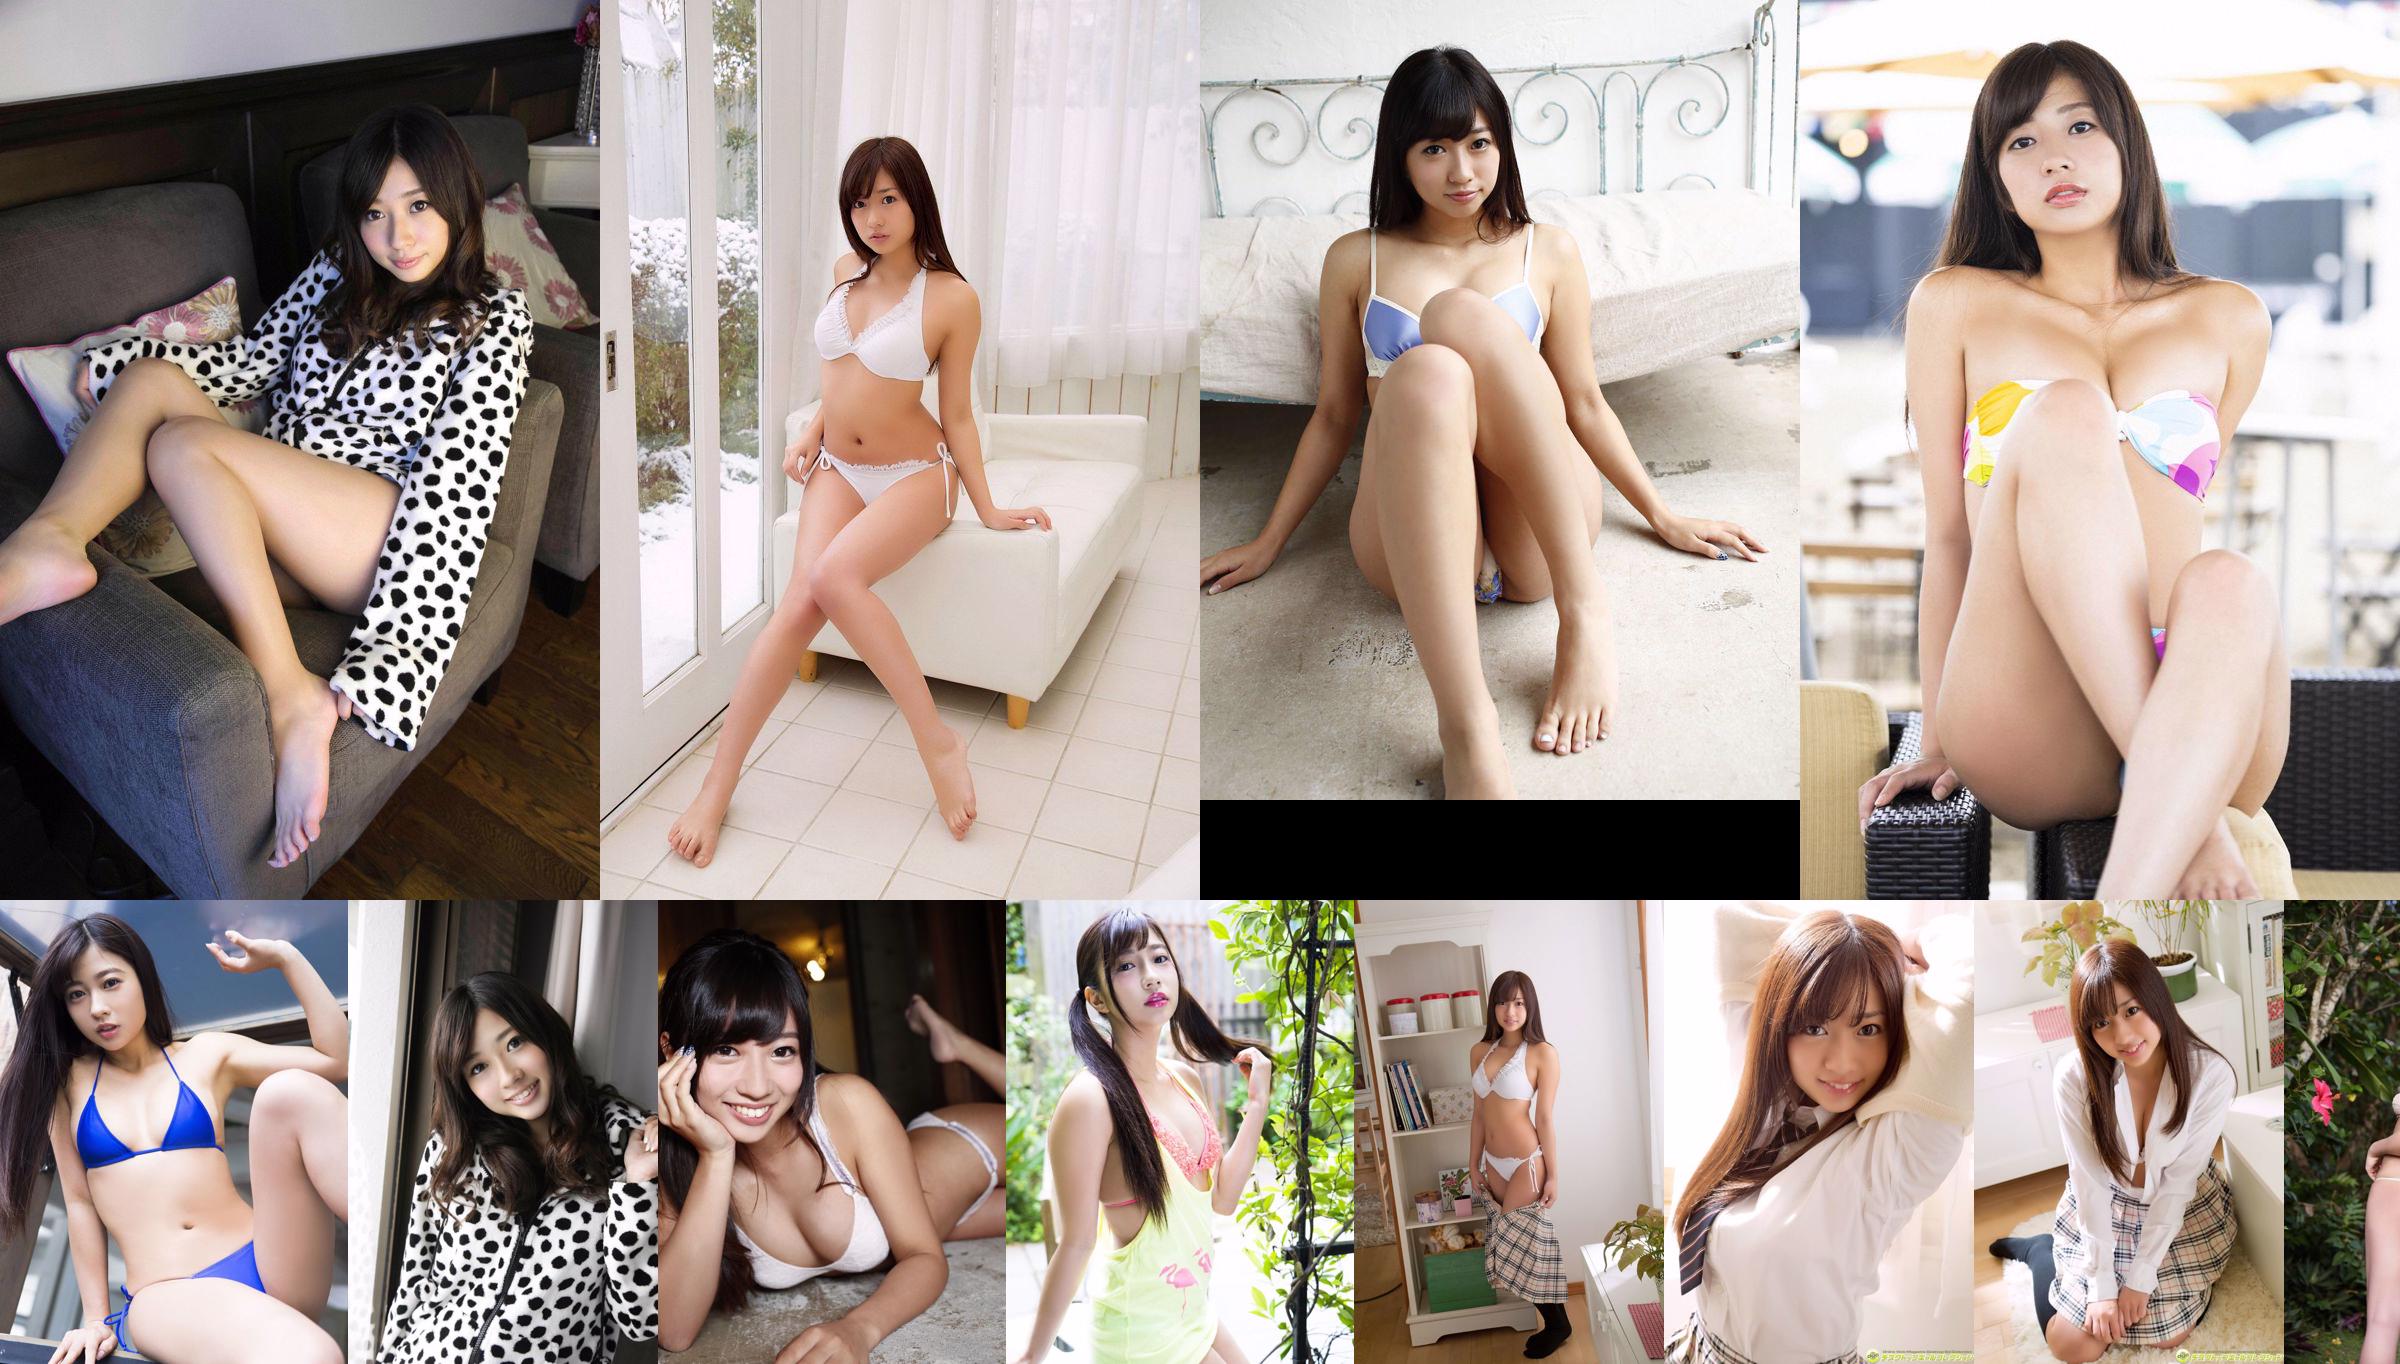 Daikan Ayaka "Appropriate Material and Milk" [Sabra.net] Strictly Girl No.fed897 Page 17